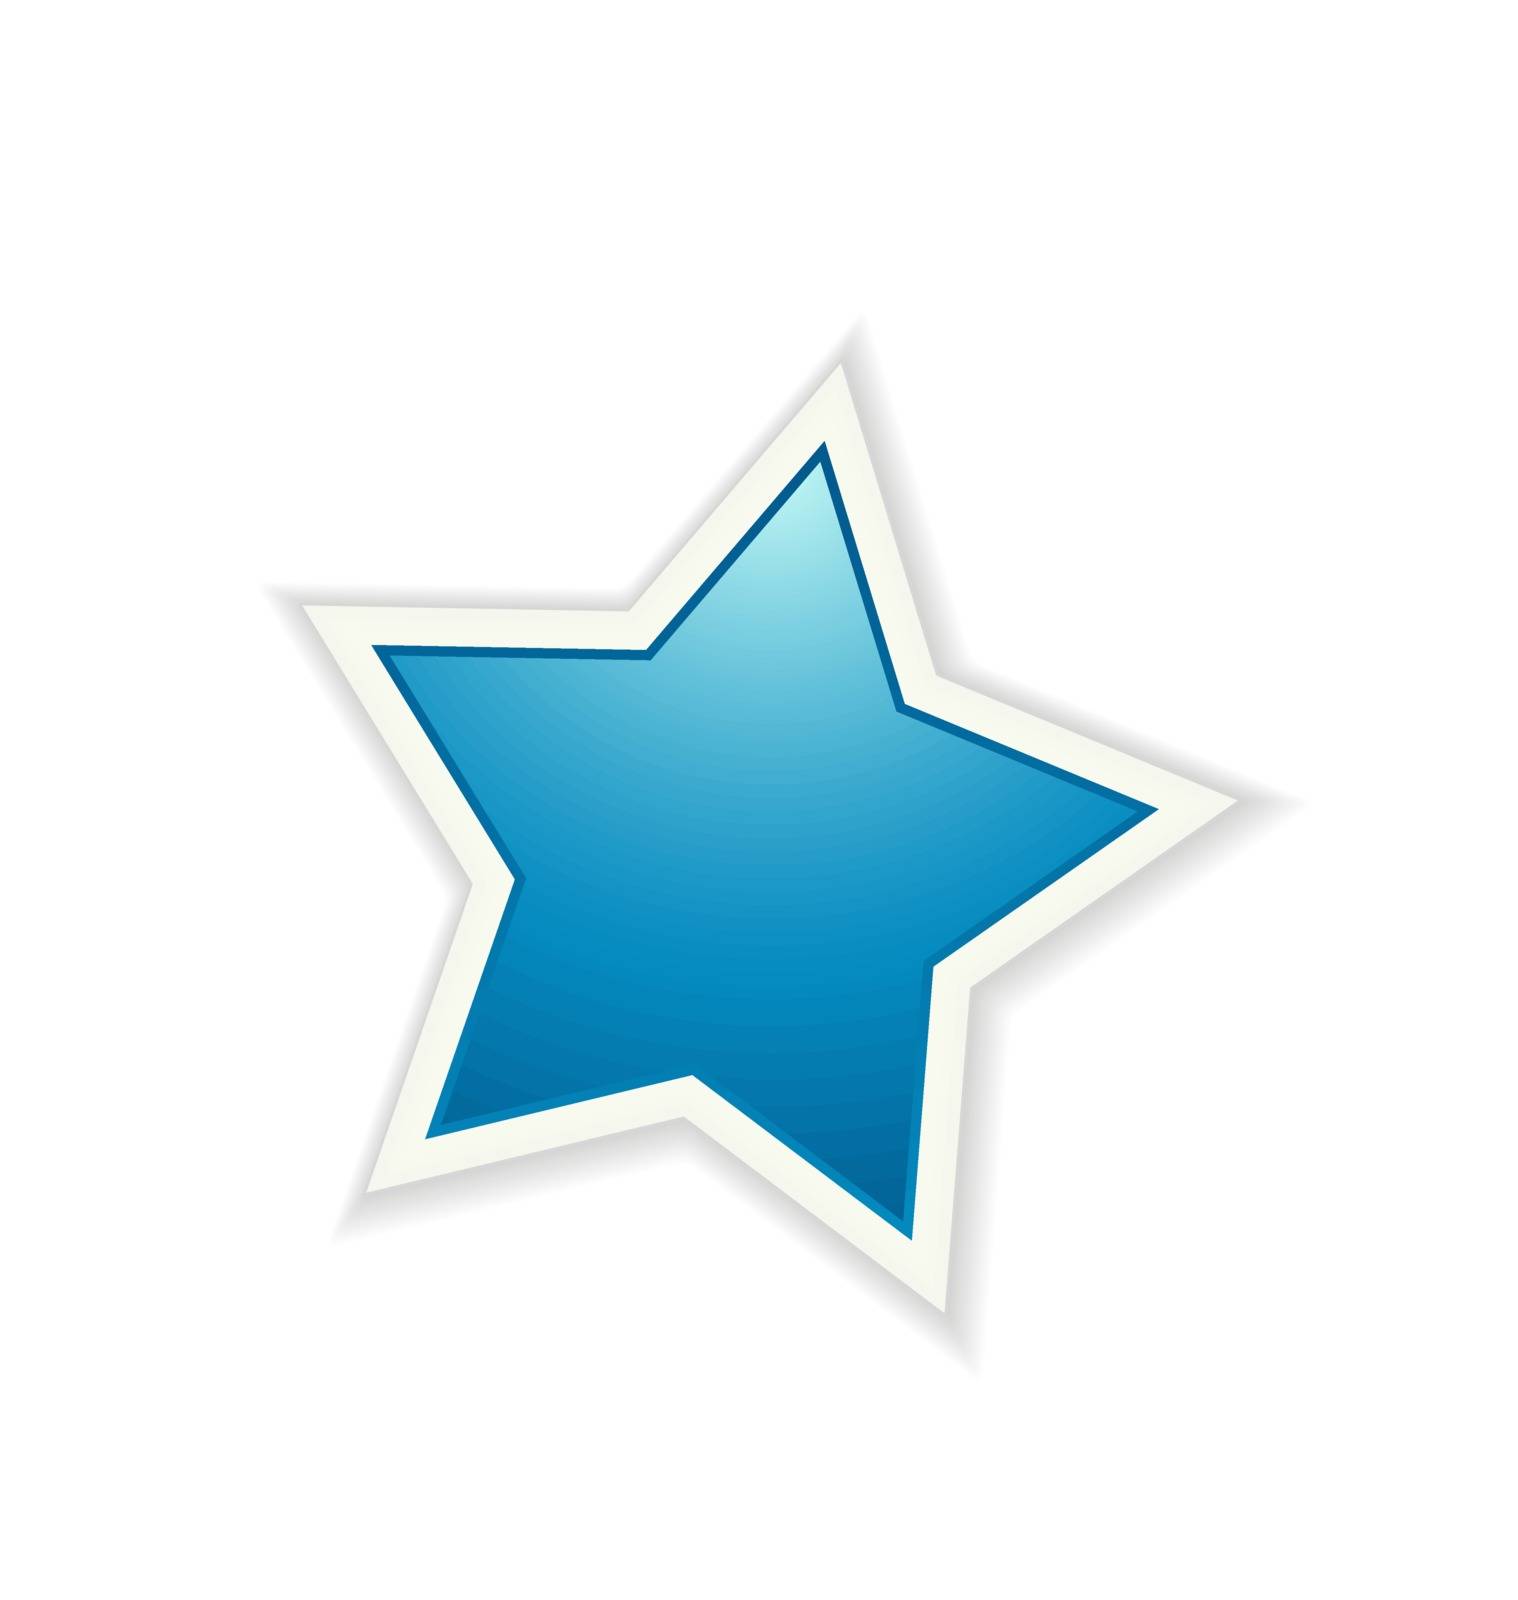 The blue star icon graphic element